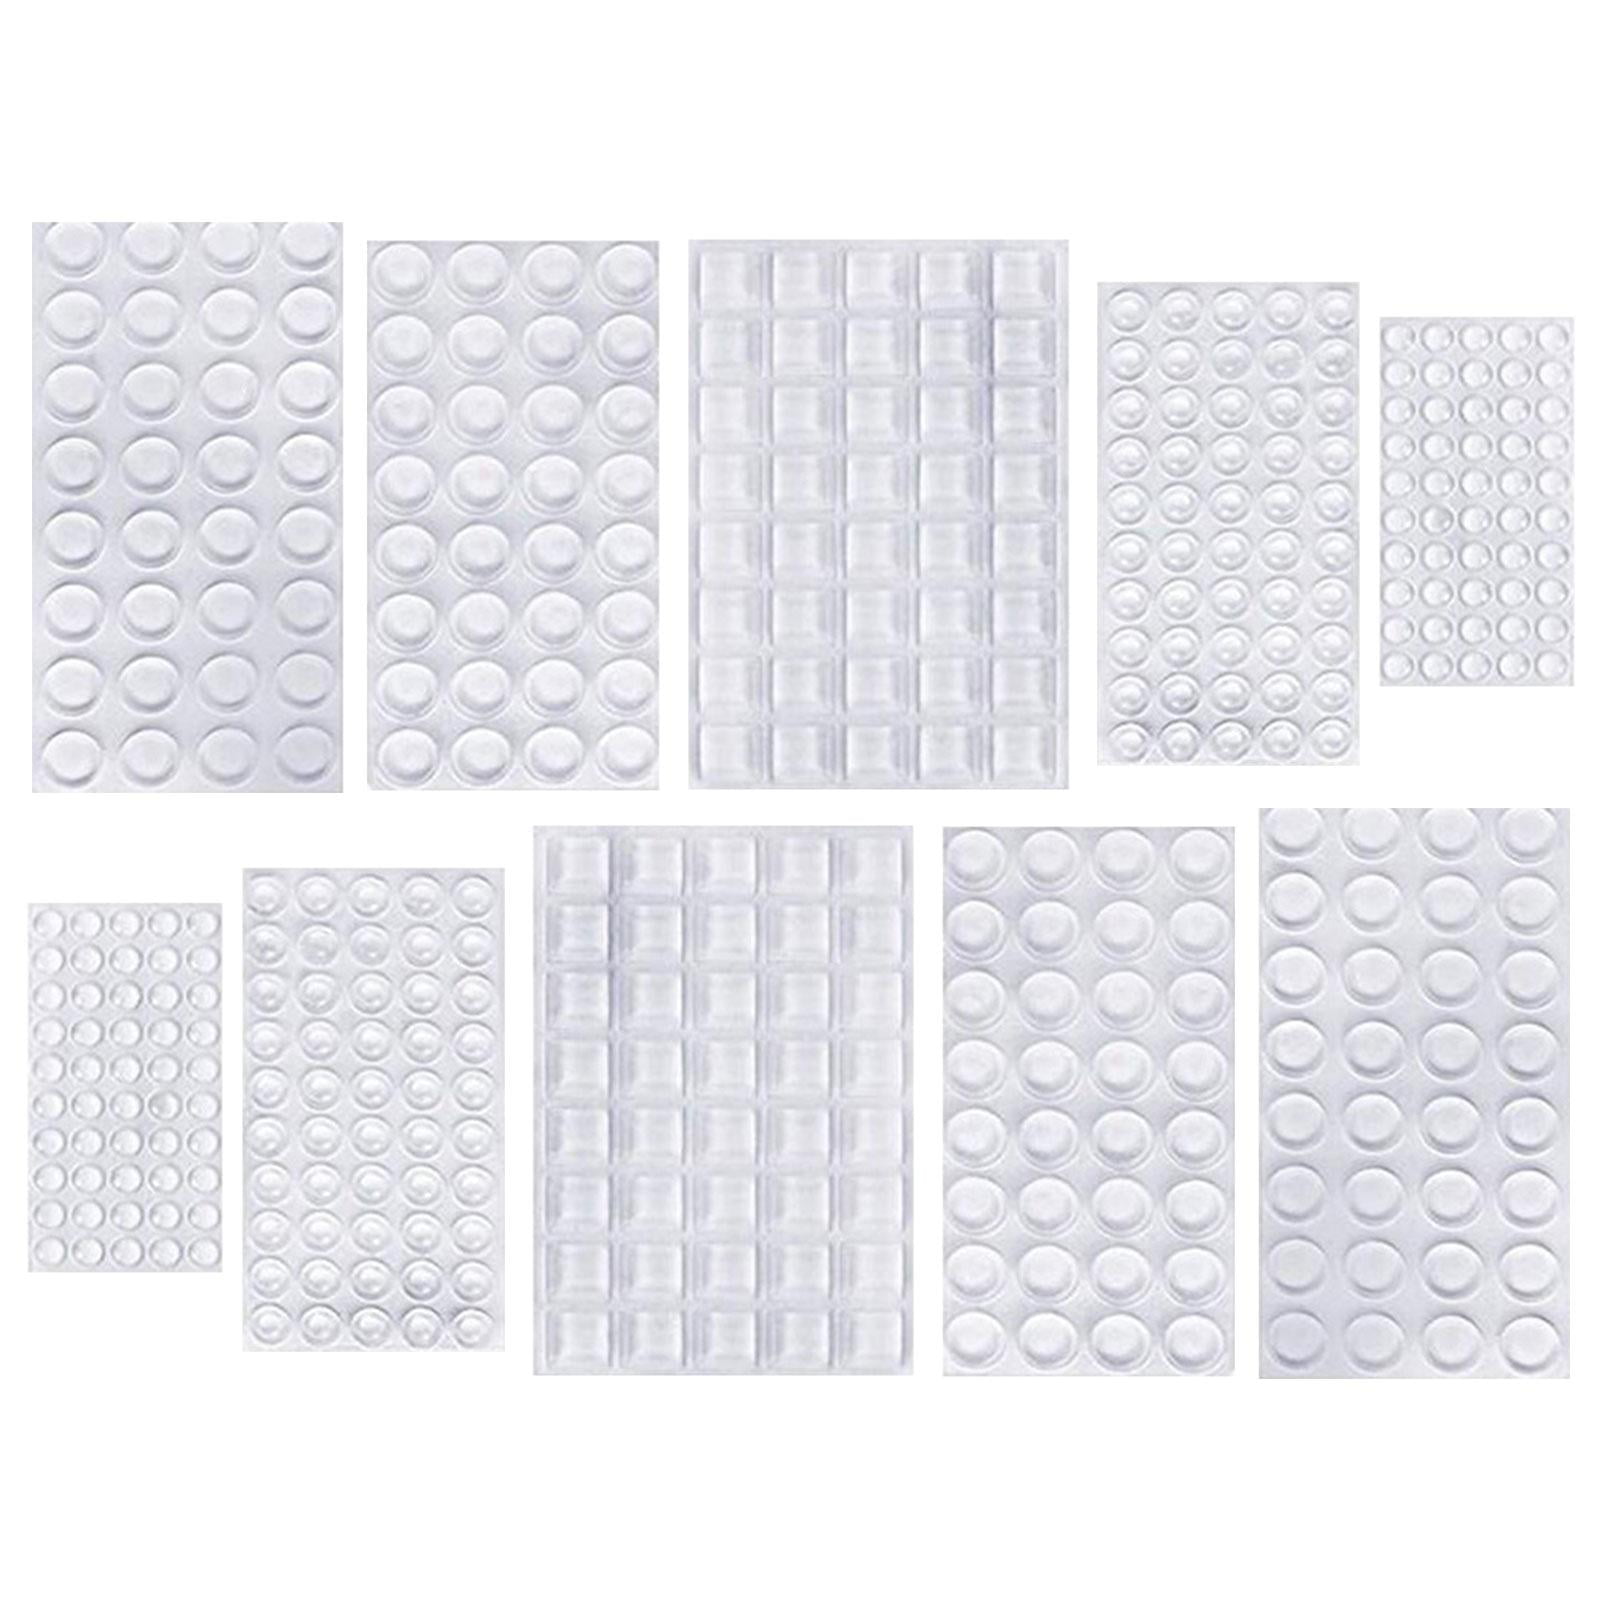 40 SELF ADHESIVE CABINET BUMPERS SQUARE 0.5" x 0.12" CLEAR BUMPERS SAMPLE PACK